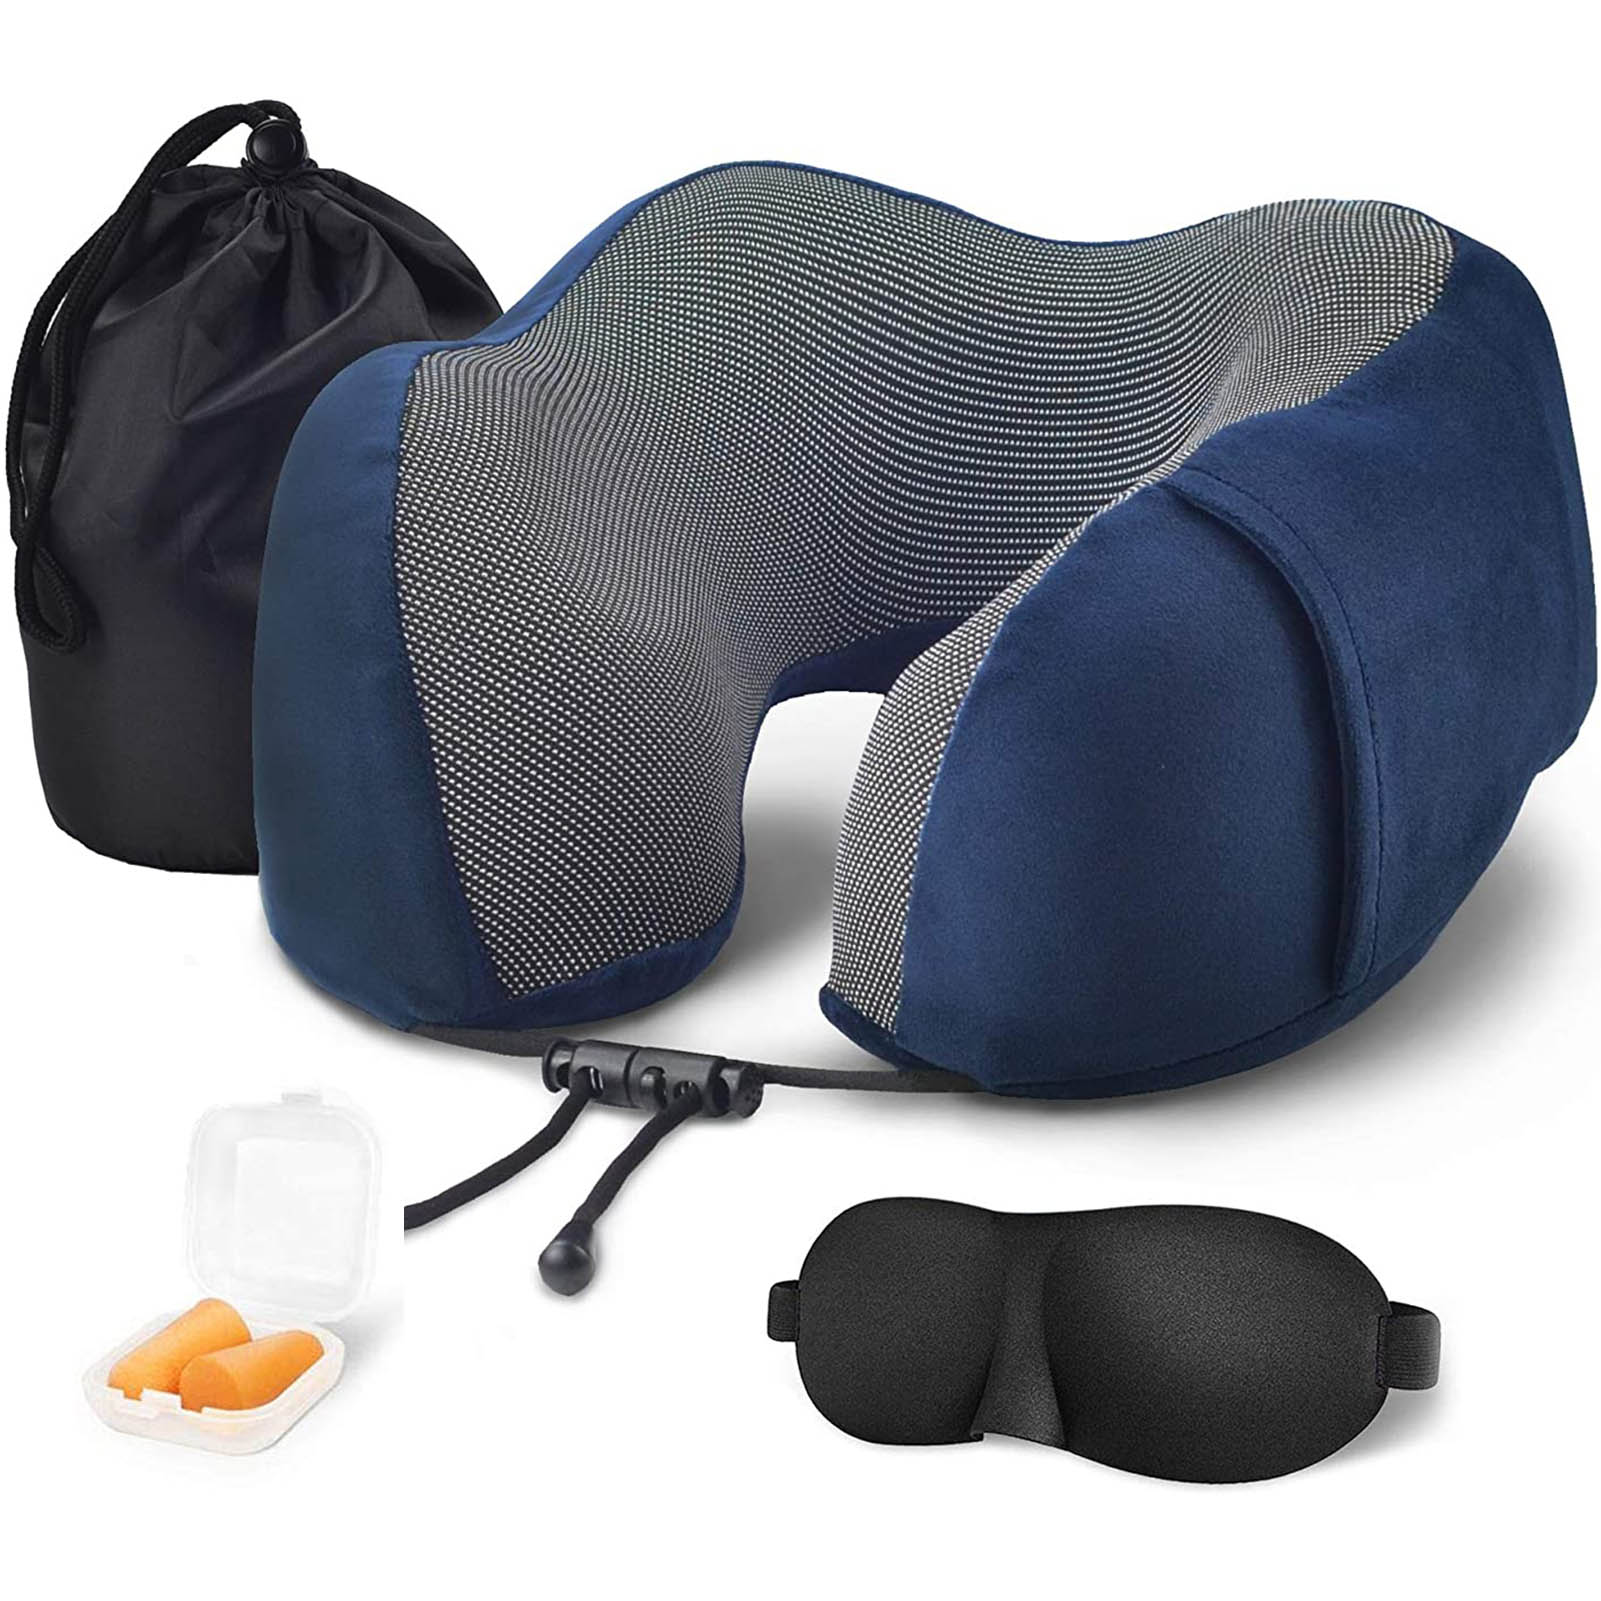 Travel Pillow Luxury Memory Foam Neck & Head Support Pillow Soft Sleeping Rest Cushion for Airplane Car & Home Best Gift (Navy Blue) - image 1 of 7